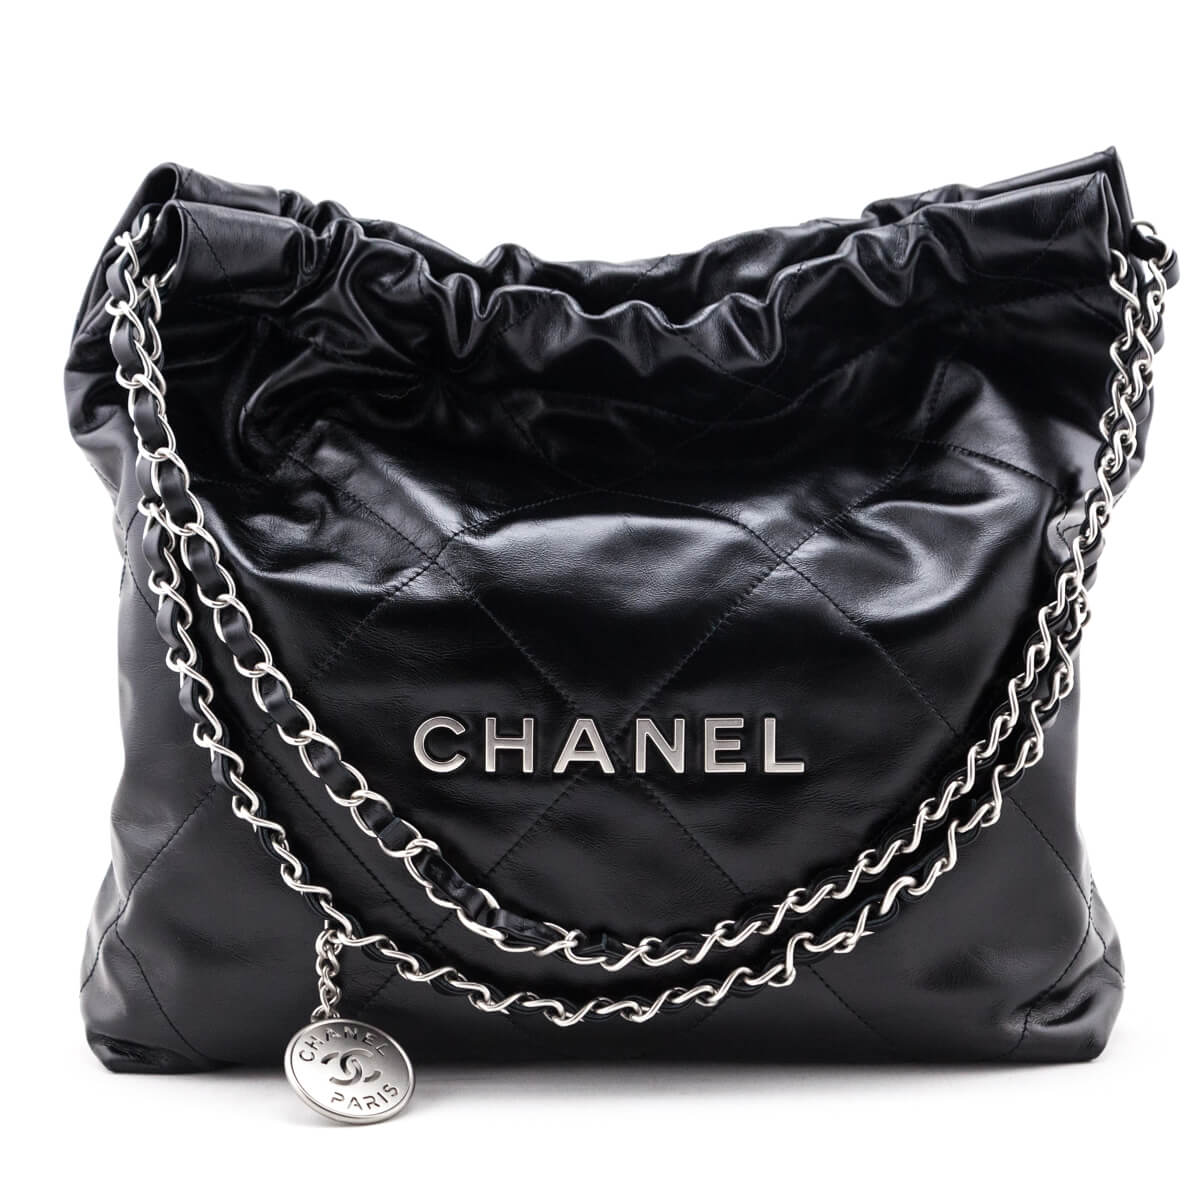 Authentic Small CHANEL 22 Hobo bag